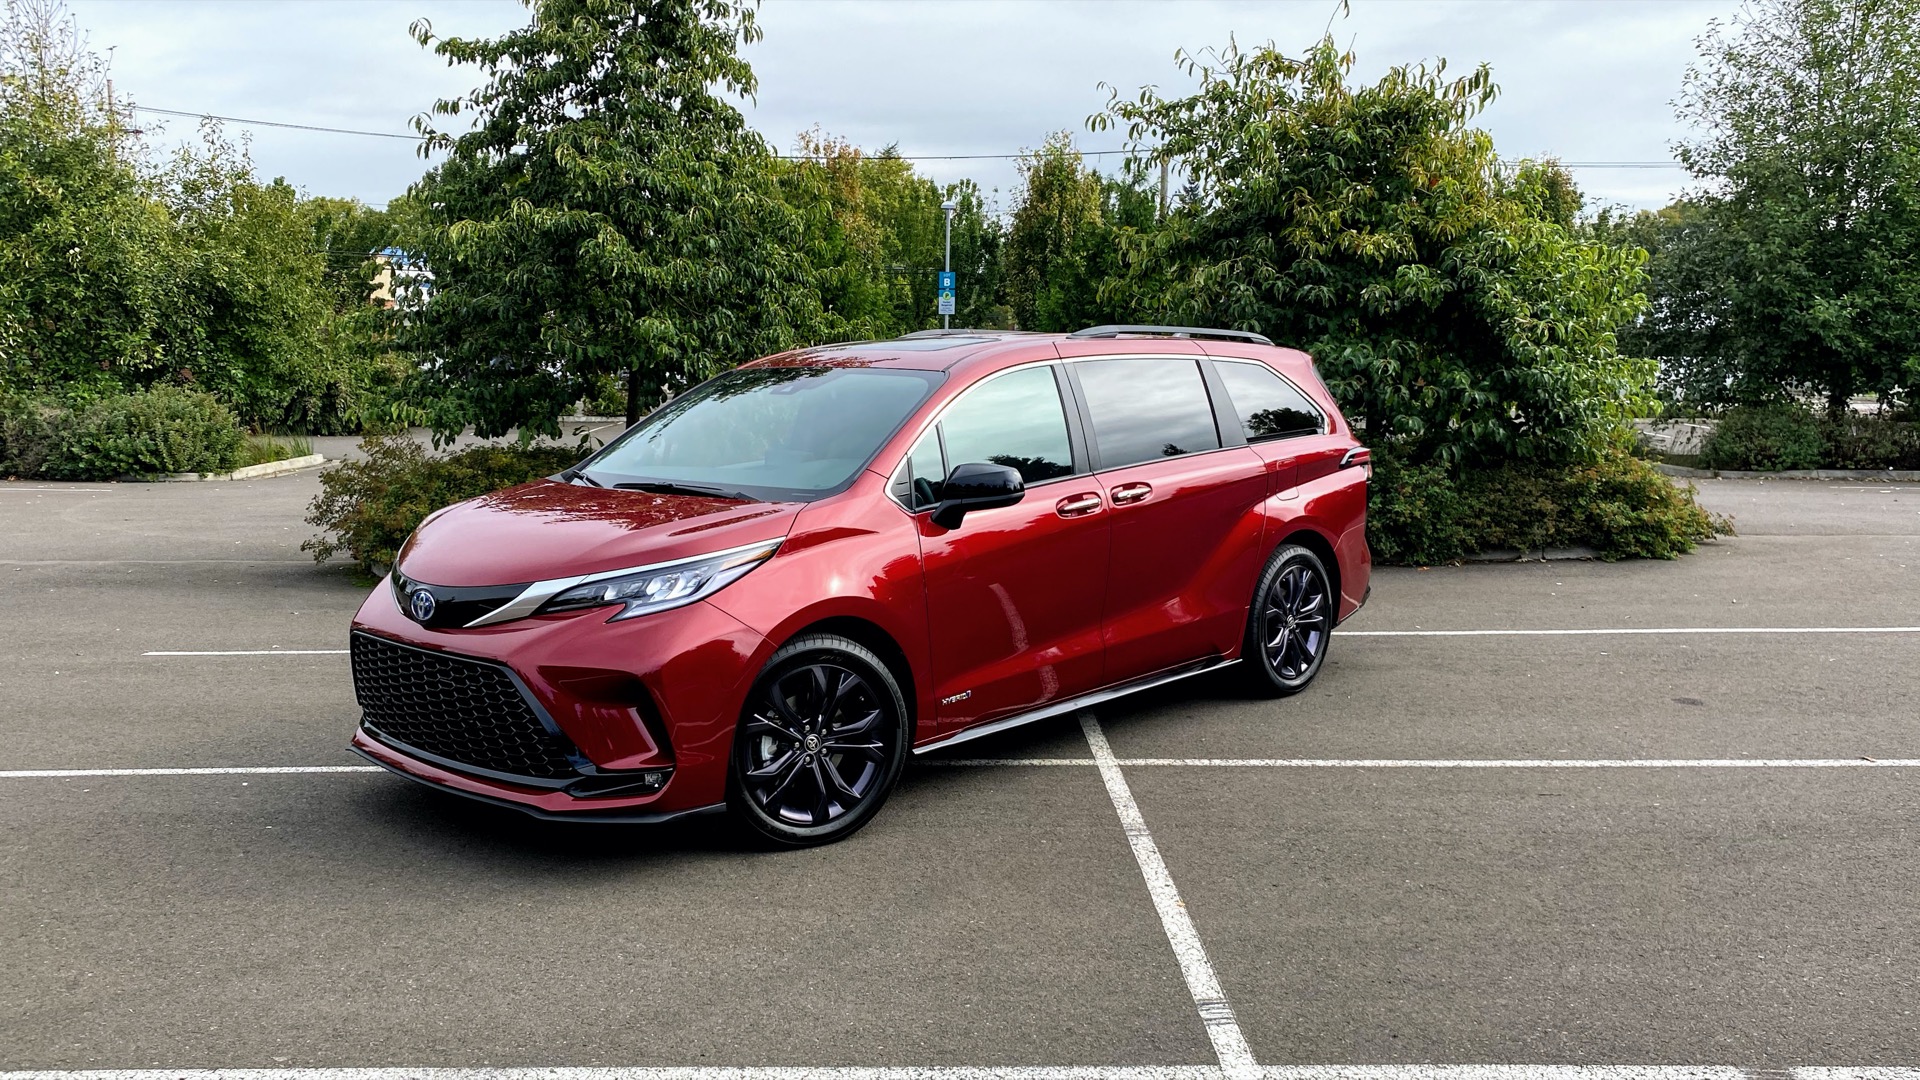 2021 Toyota Sienna first drive: 36 mpg and design flair make the